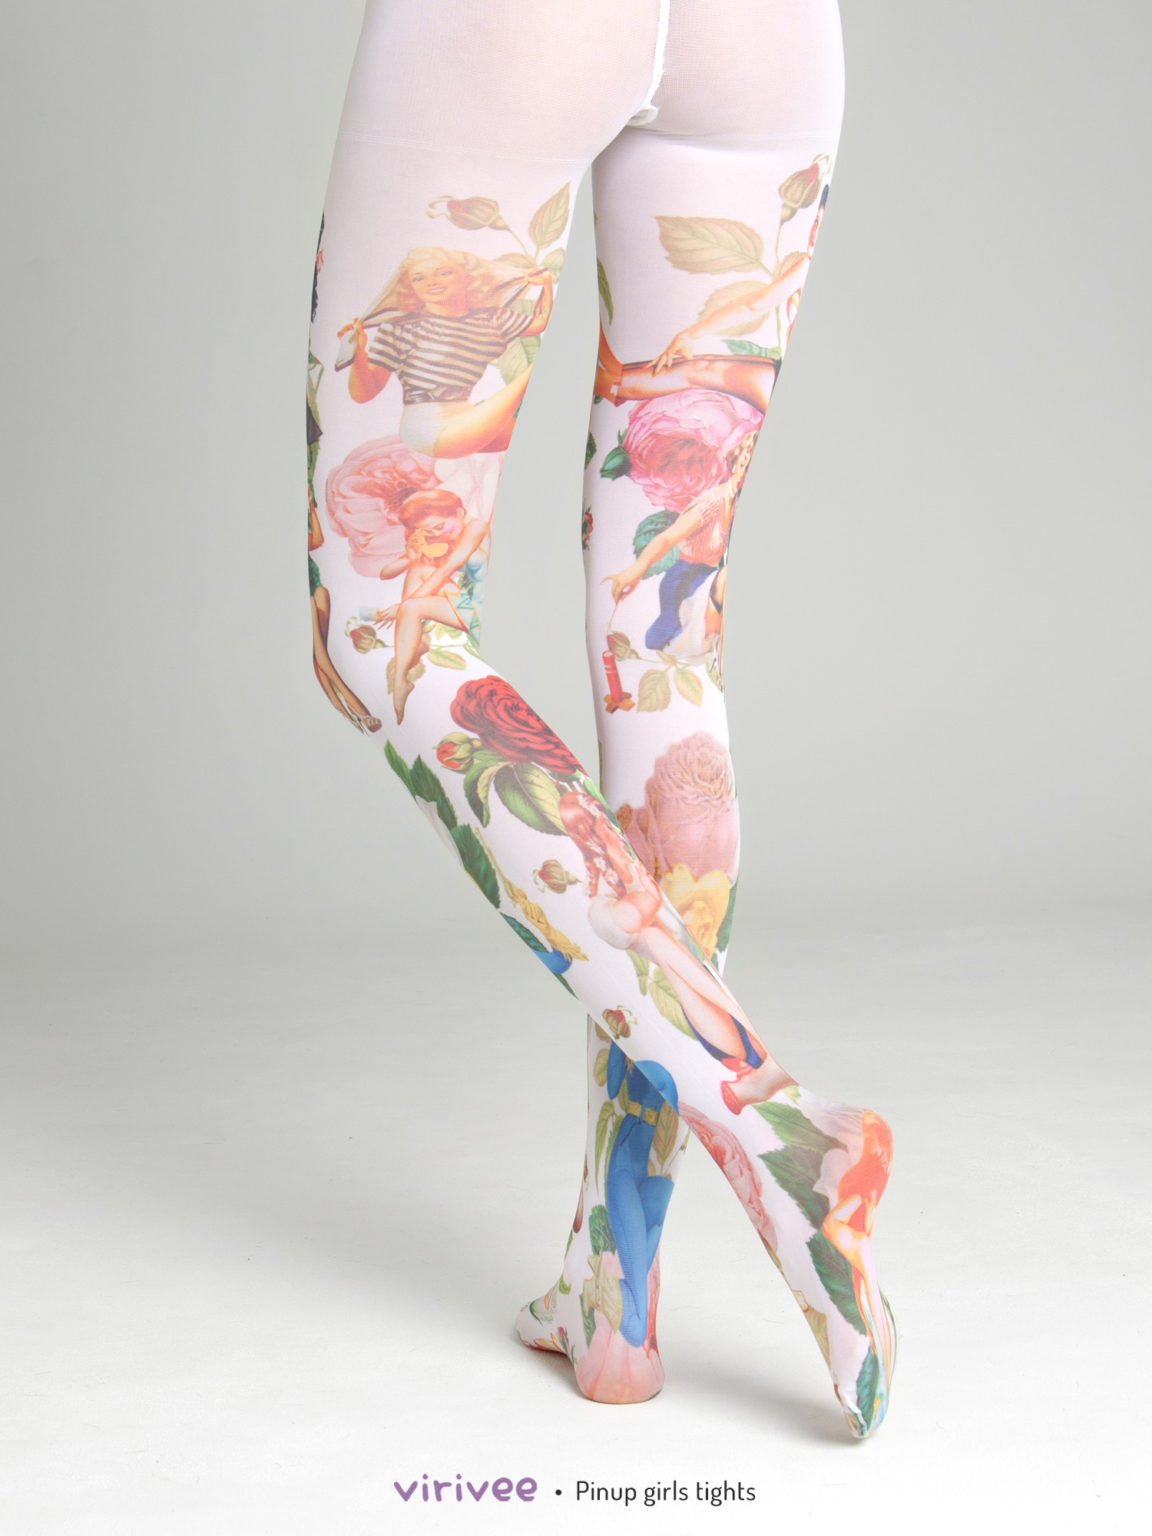 Pinup girls tights - Virivee Tights - Unique tights designed and made ...